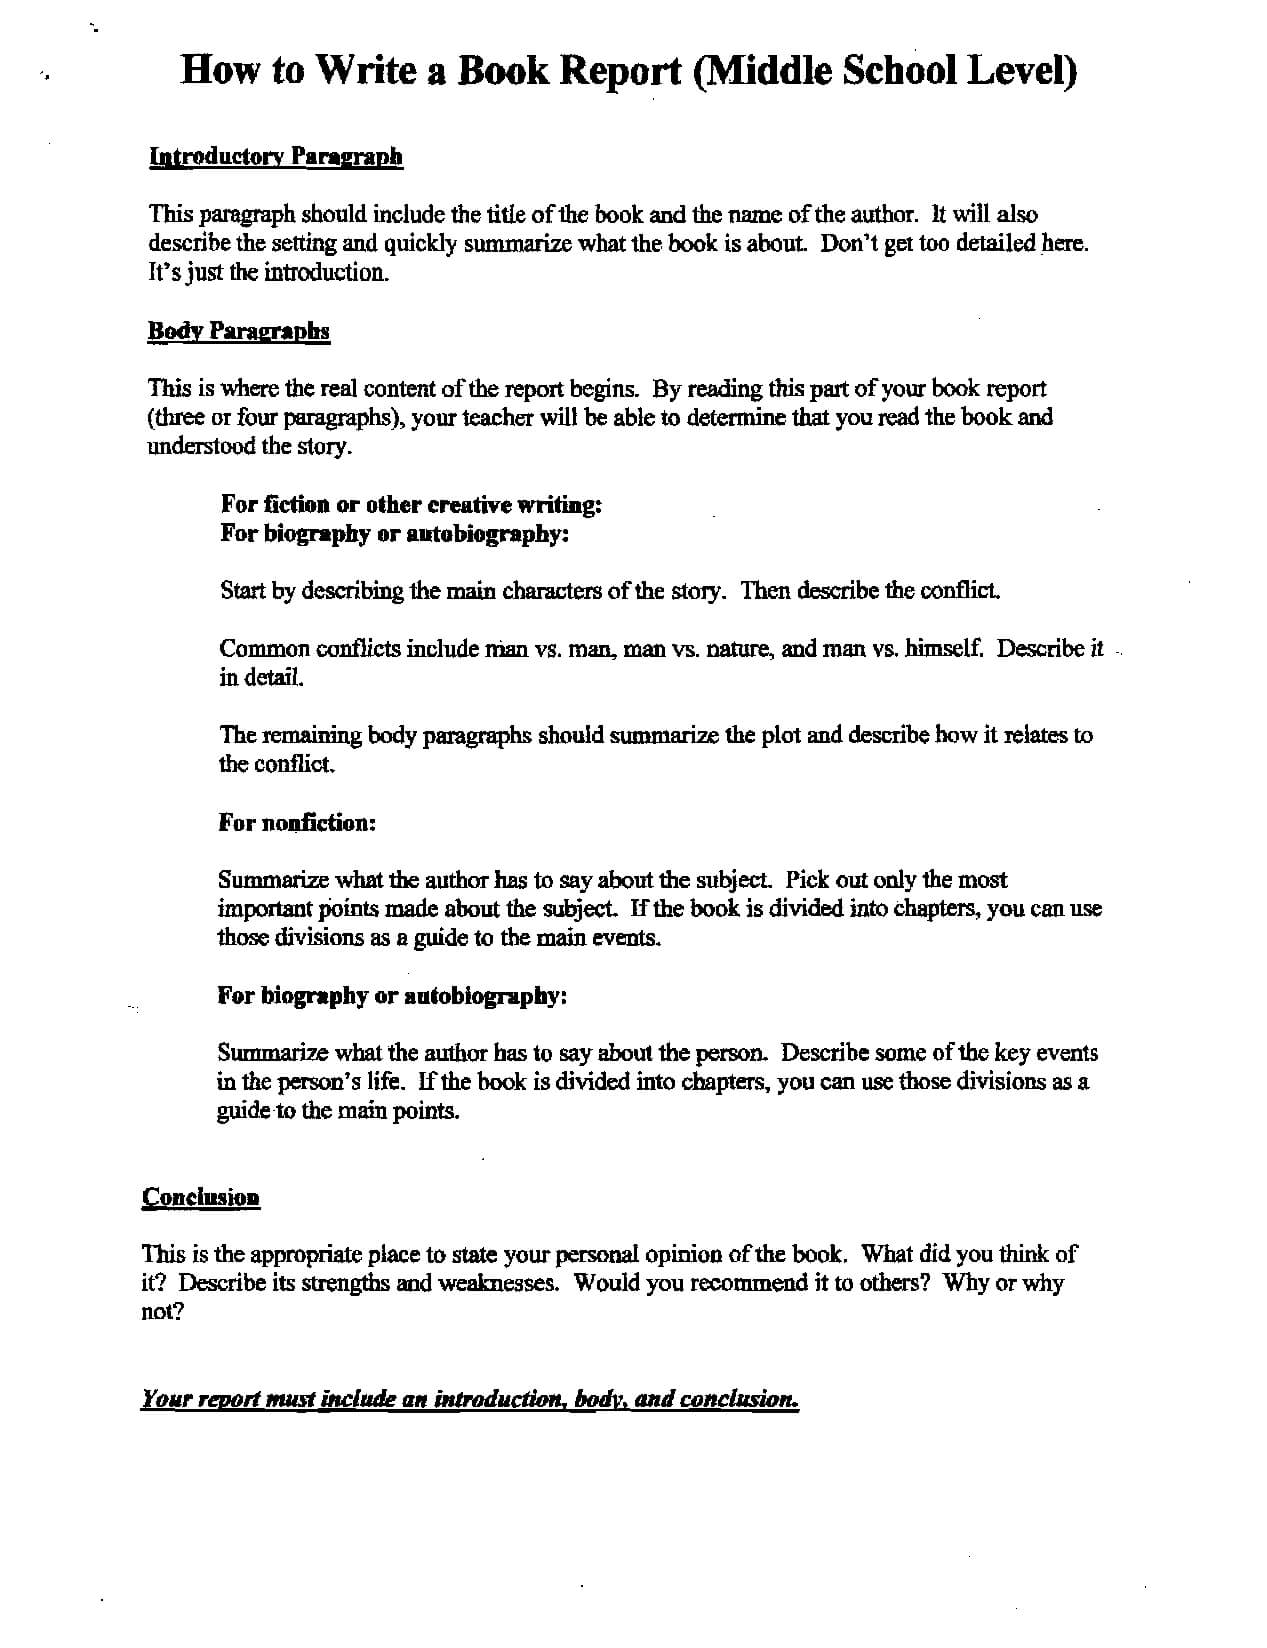 Middle School Book Report Flowchart | Middle School Book Within Book Report Template High School